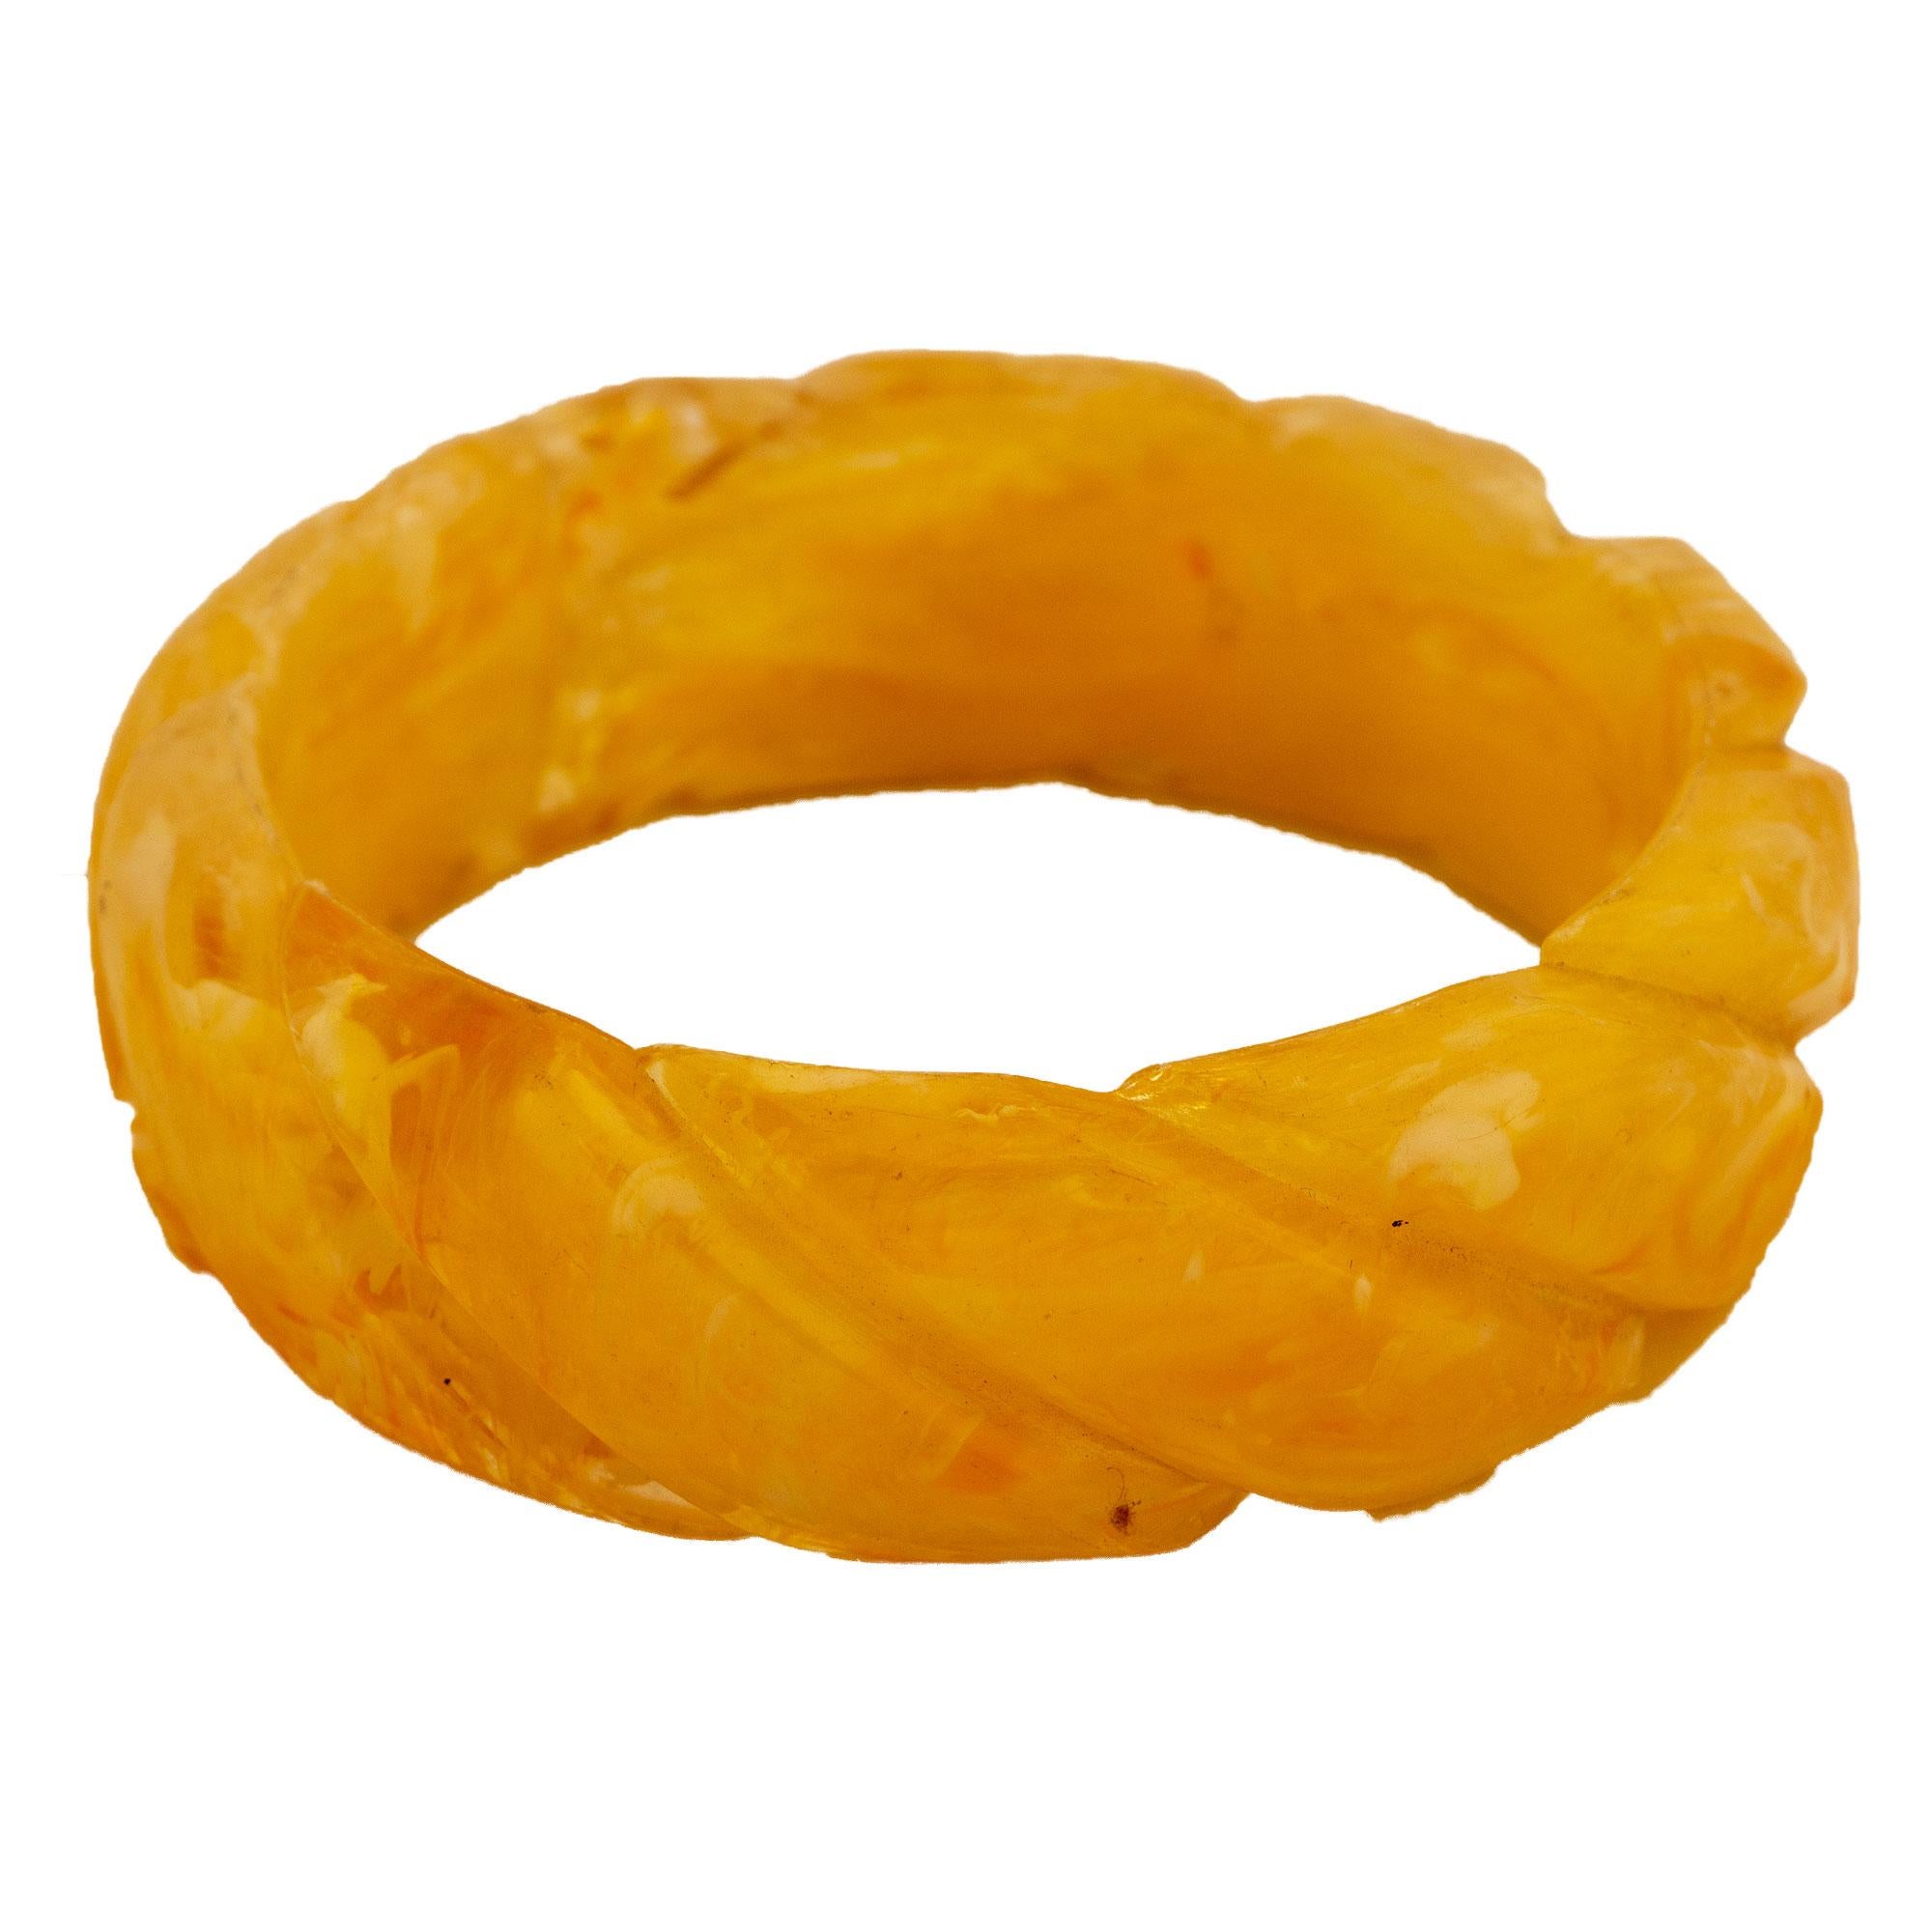 Bakelite bangle with carved diagonal braid shape, transparent and honey color.
Flattering bangle in the colors of early summer, rape honey and and translucency meet here. The elaborated shape of the braid pattern emphasizes the summer grace of this